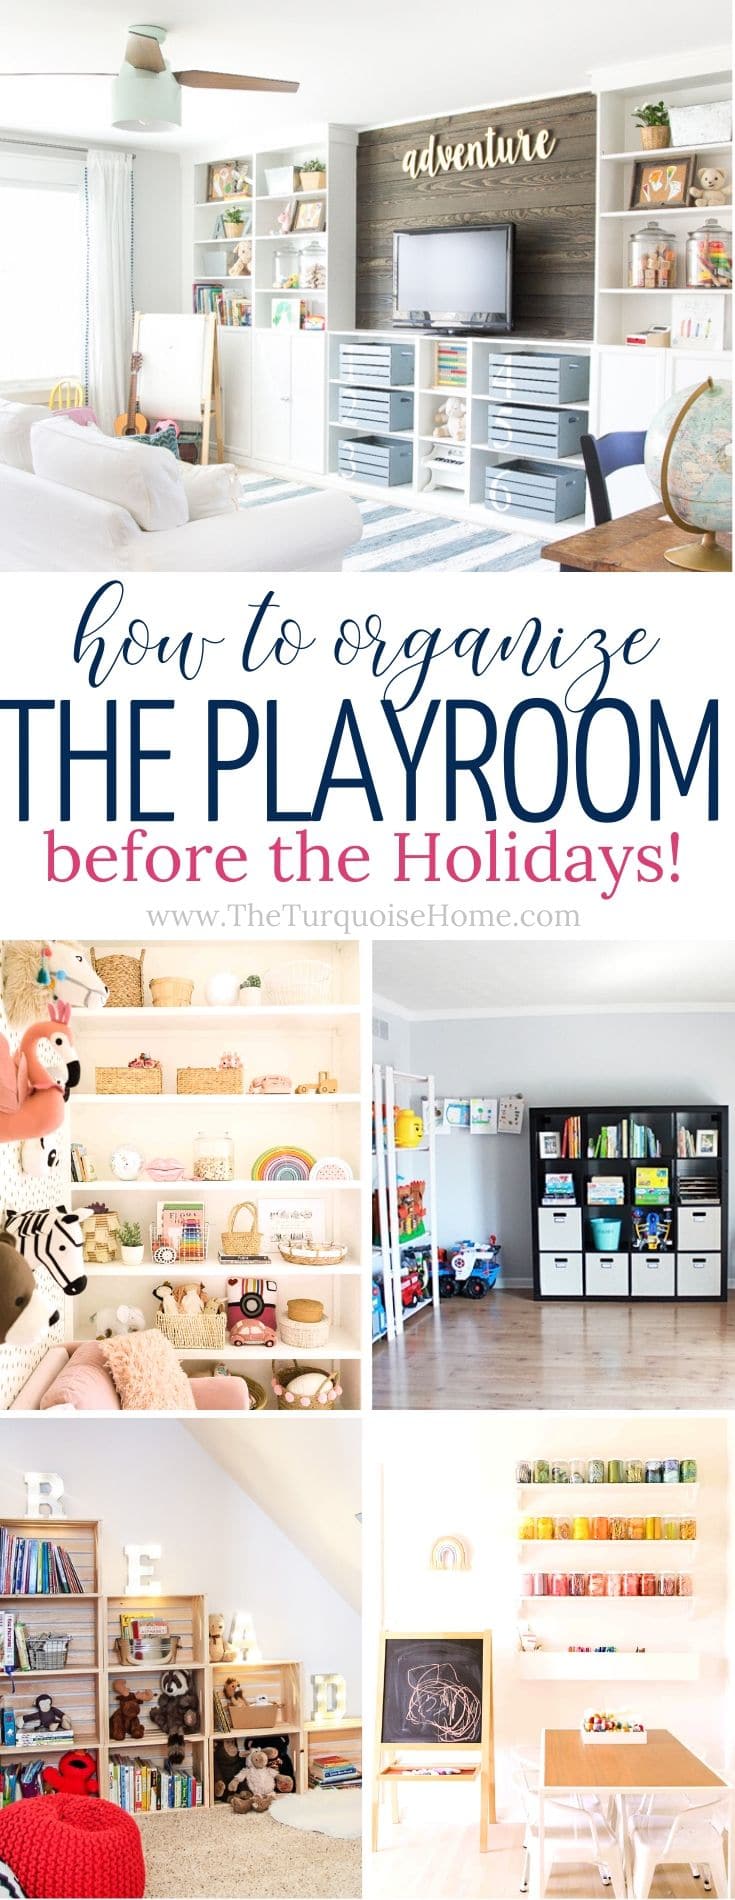 How To Organize The Playroom Before The Holidays